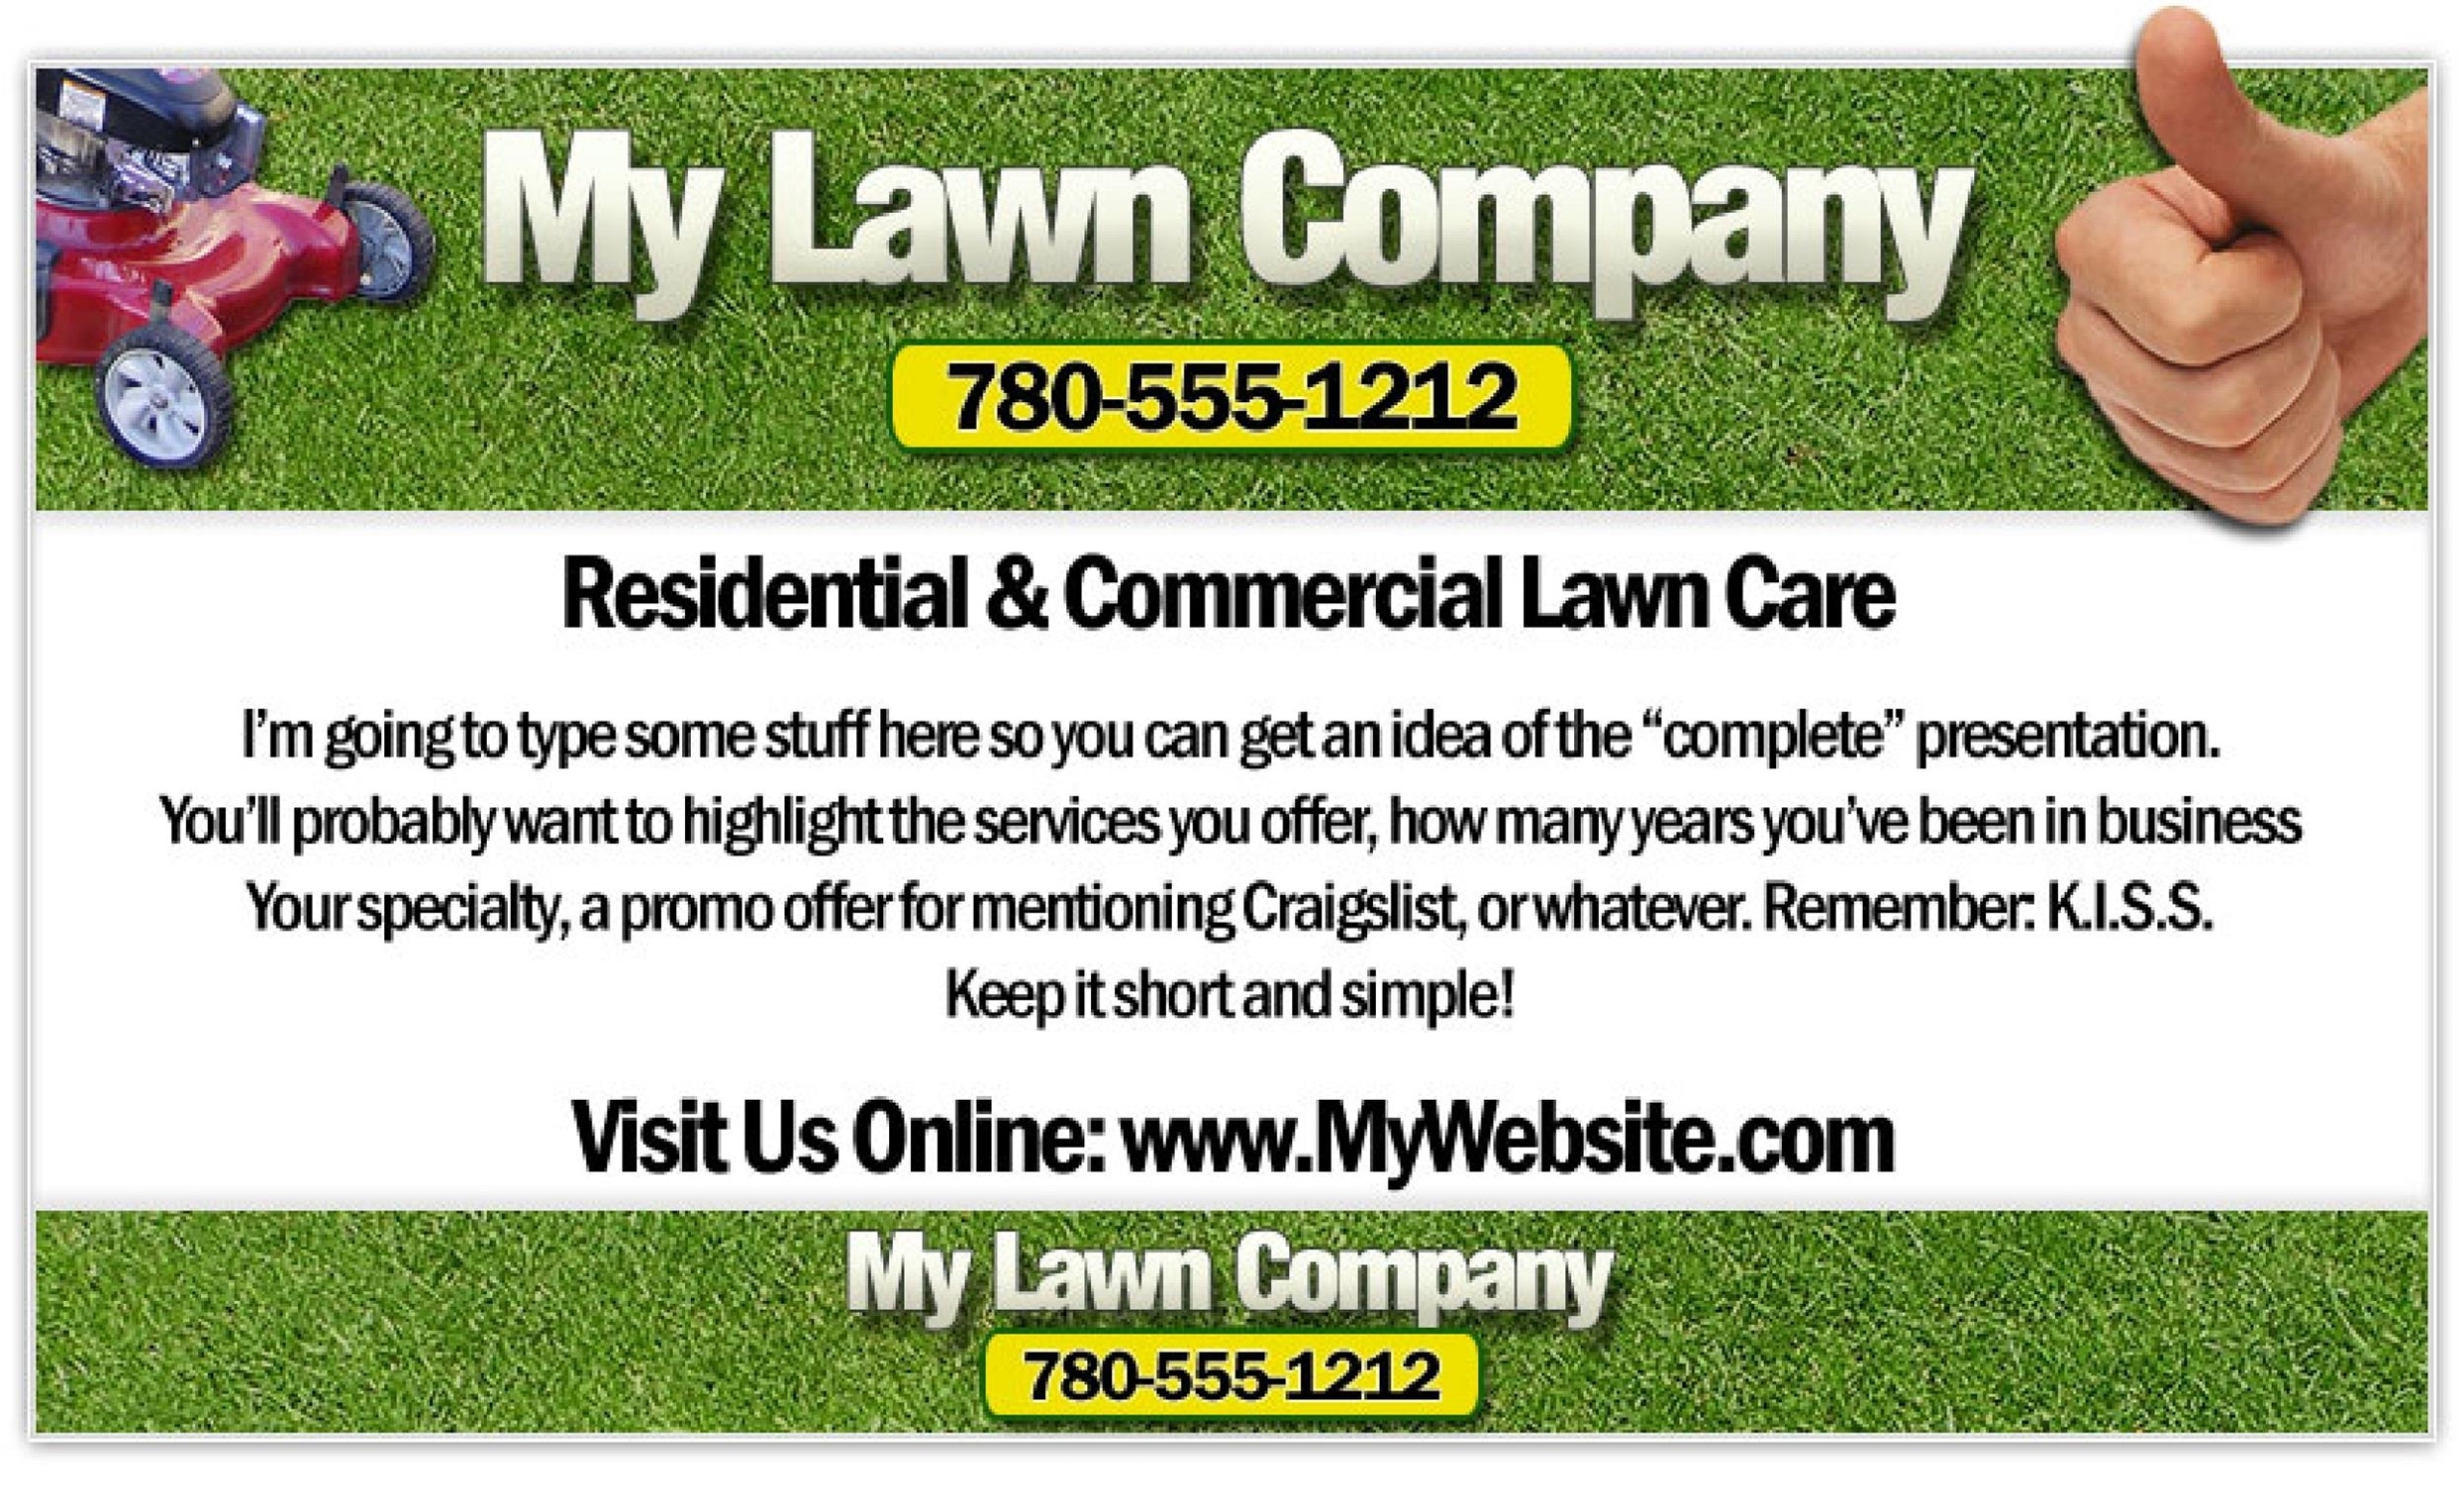 30 Free Lawn Care Flyer Templates [Lawn Mower Flyers] ᐅ Templatelab for Free Lawn Mowing Flyer Template